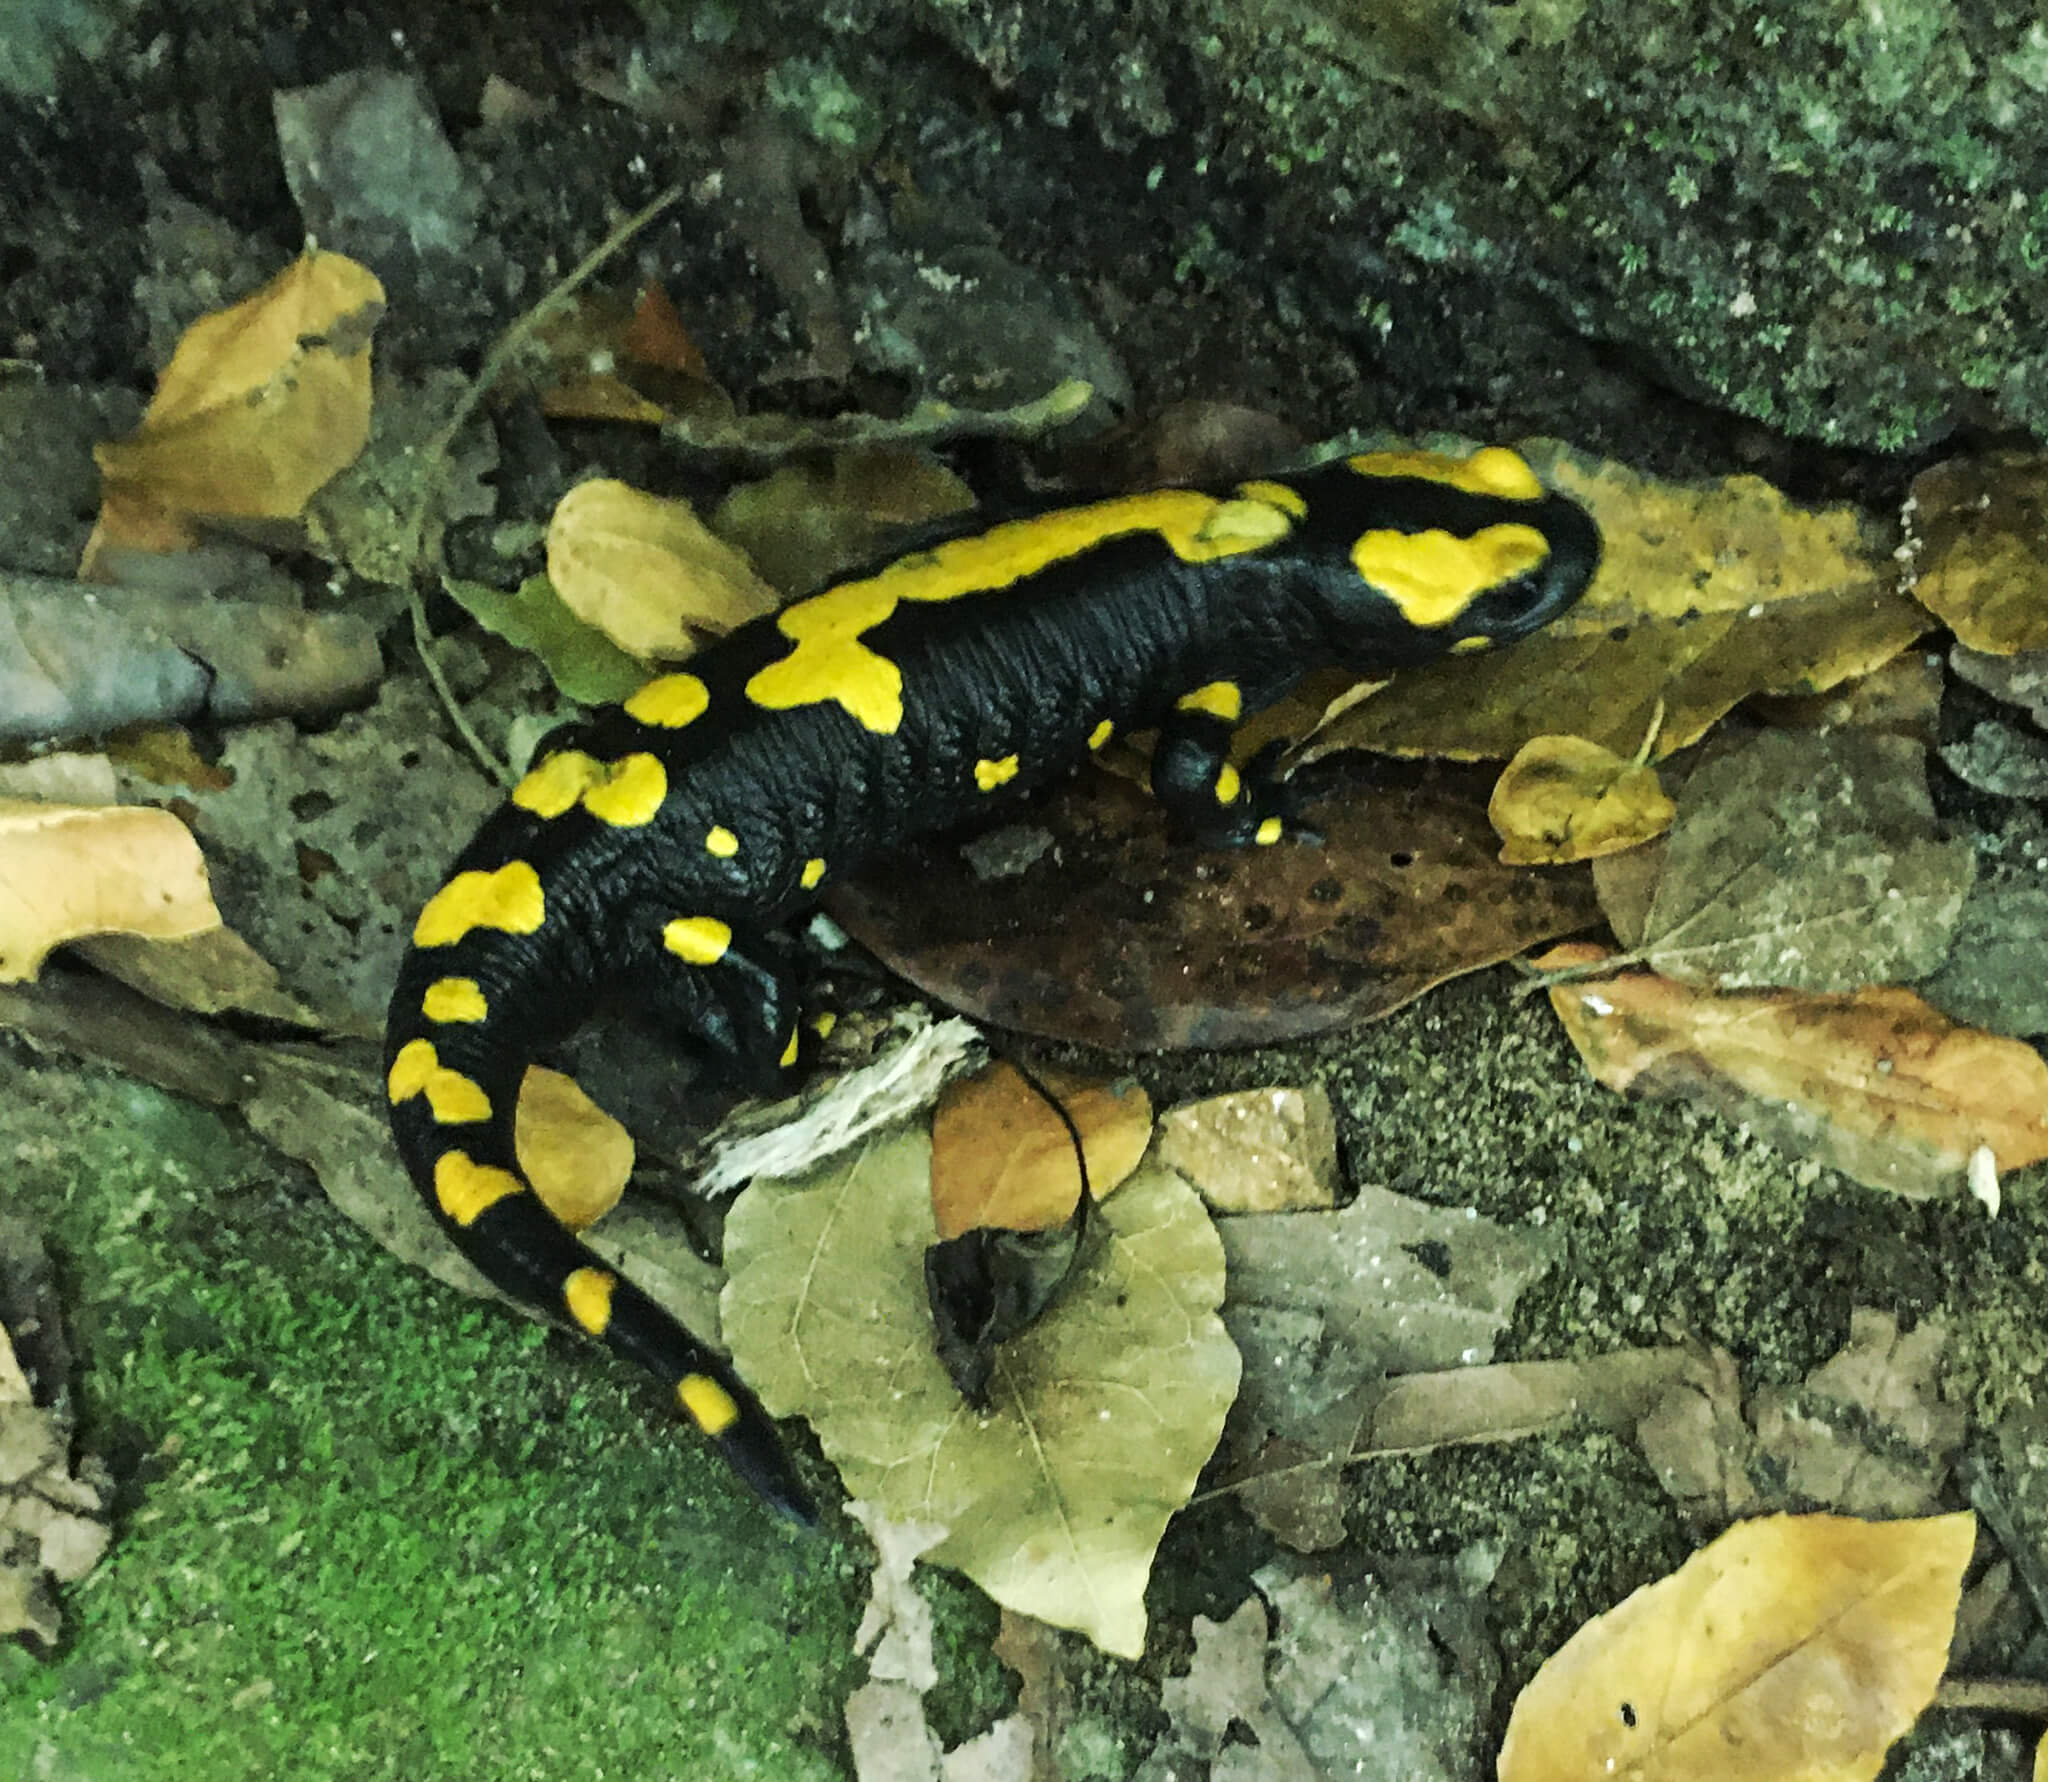 A black fire salamander with yellow spots